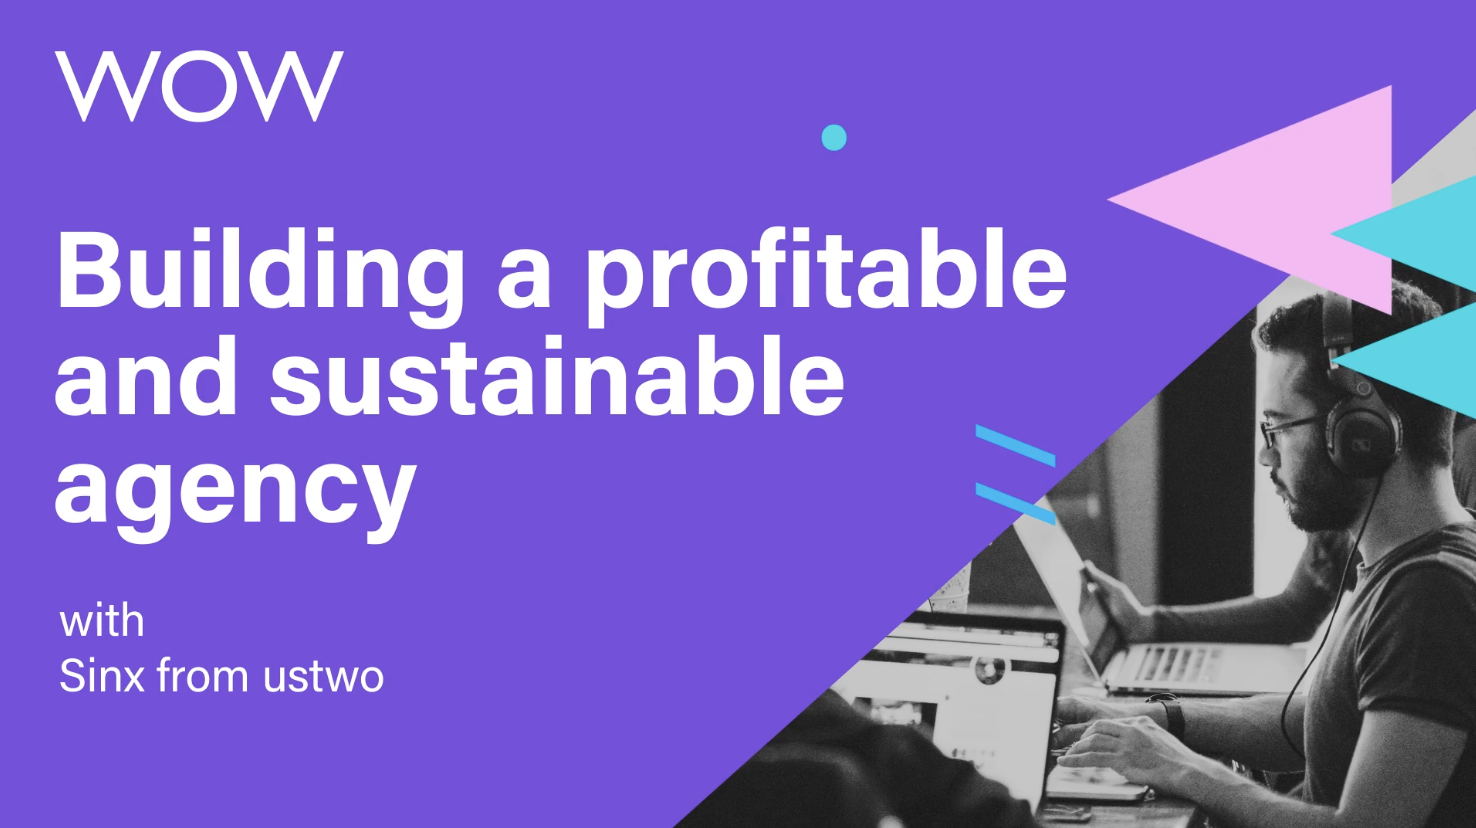 Build a profitable and sustainable digital agency video with Sinx from ustwo by tech accountants The Wow Company